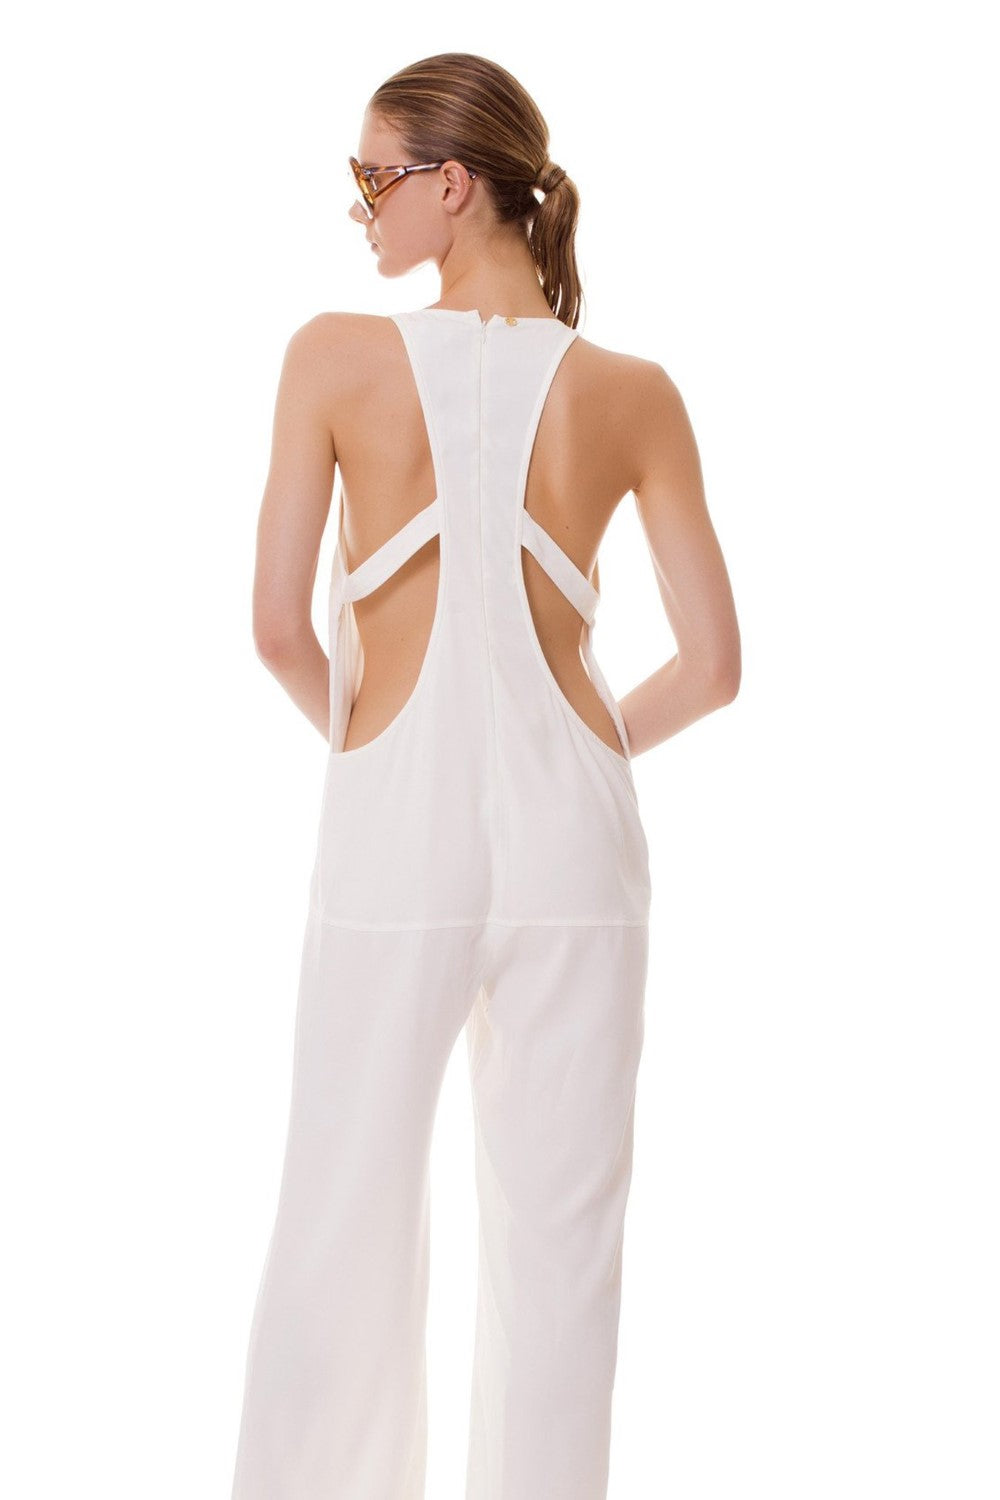 For a clean, yet remarkable look, go for this full lenght white jumpsuit